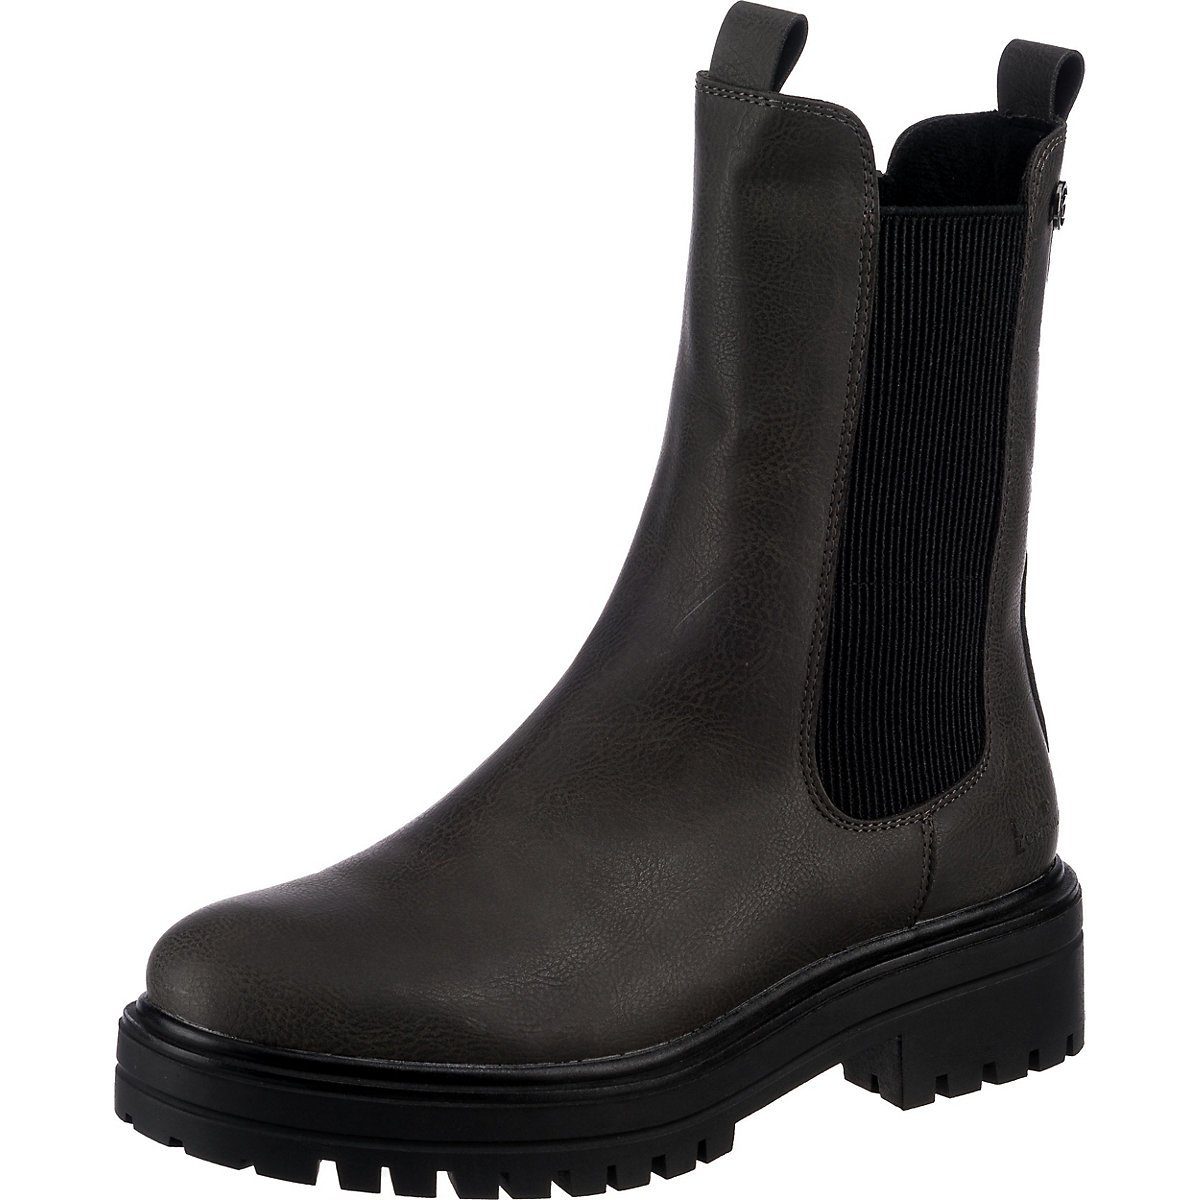 TOM TAILOR »Chelsea Boots« Chelseaboots kaufen | OTTO